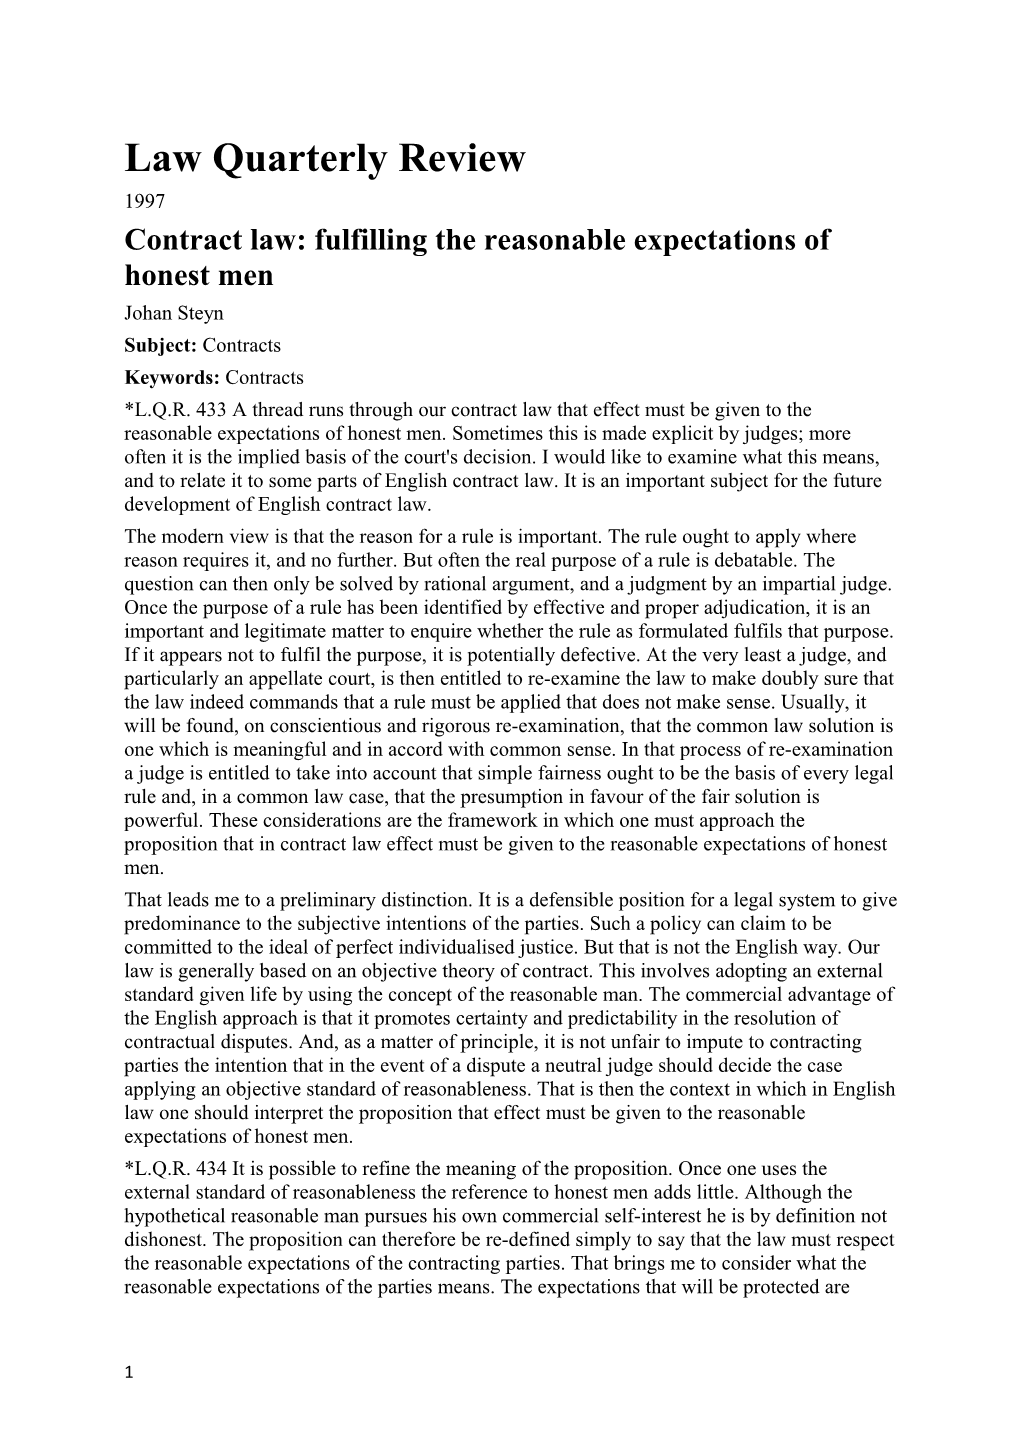 Contract Law: Fulfilling the Reasonable Expectations of Honest Men